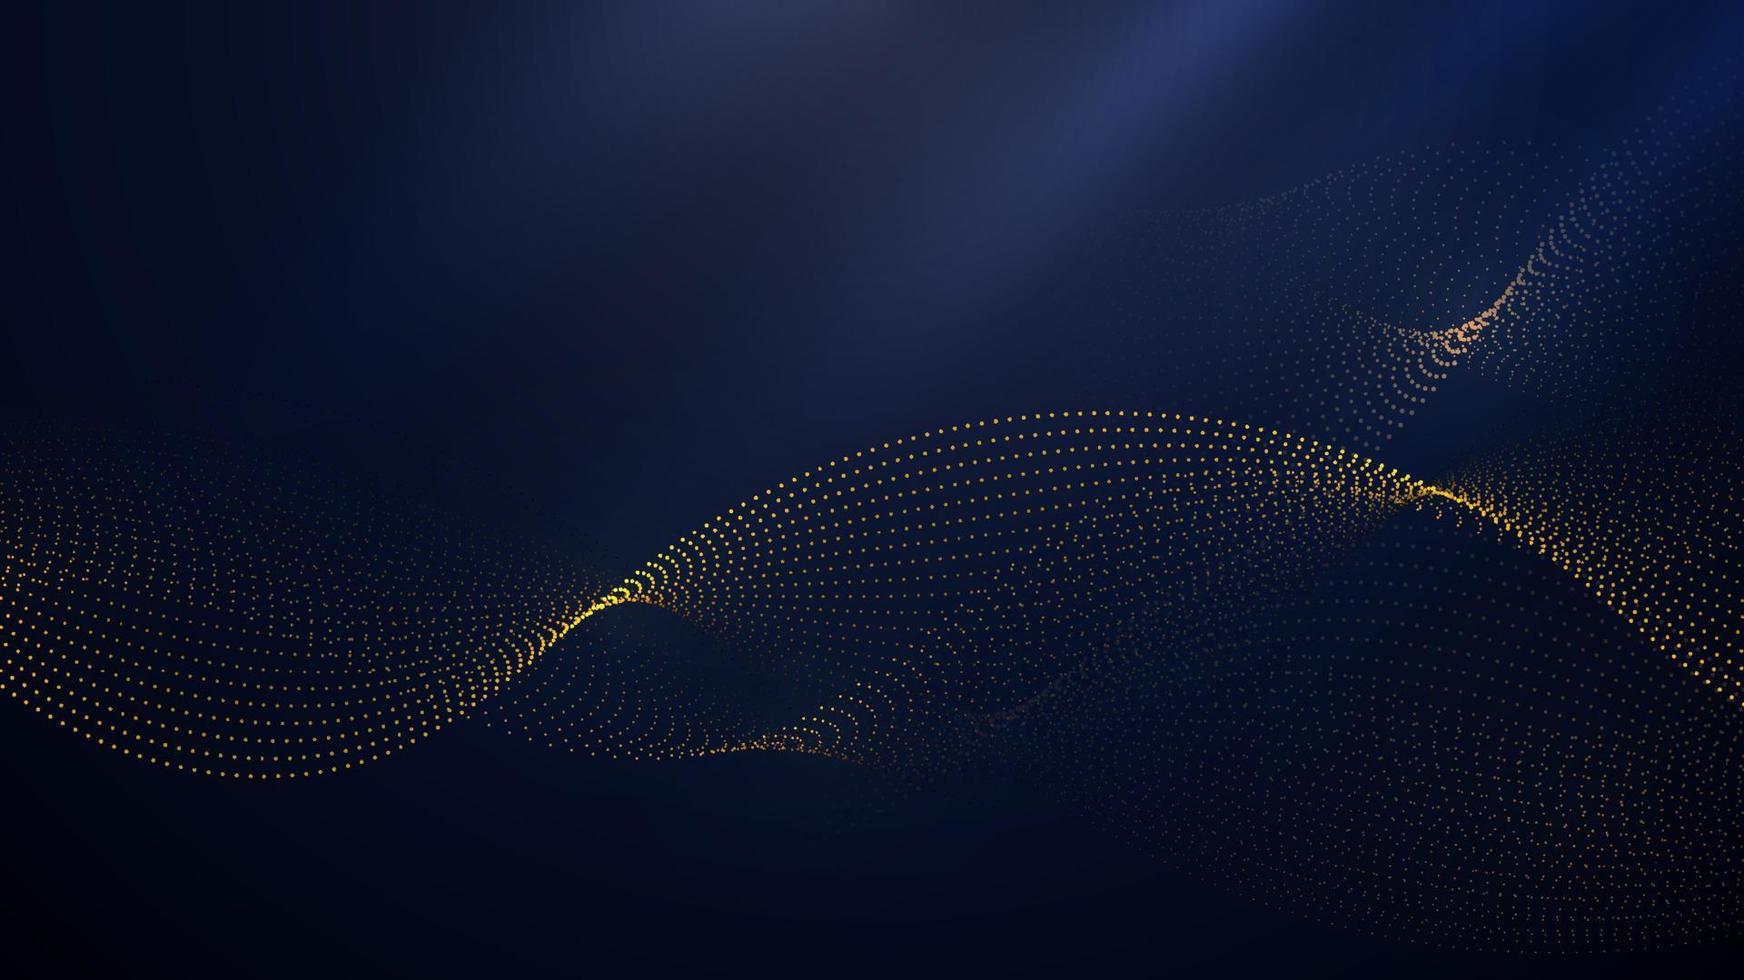 Abstract golden dots wave particles on dark blue background luxury style vector